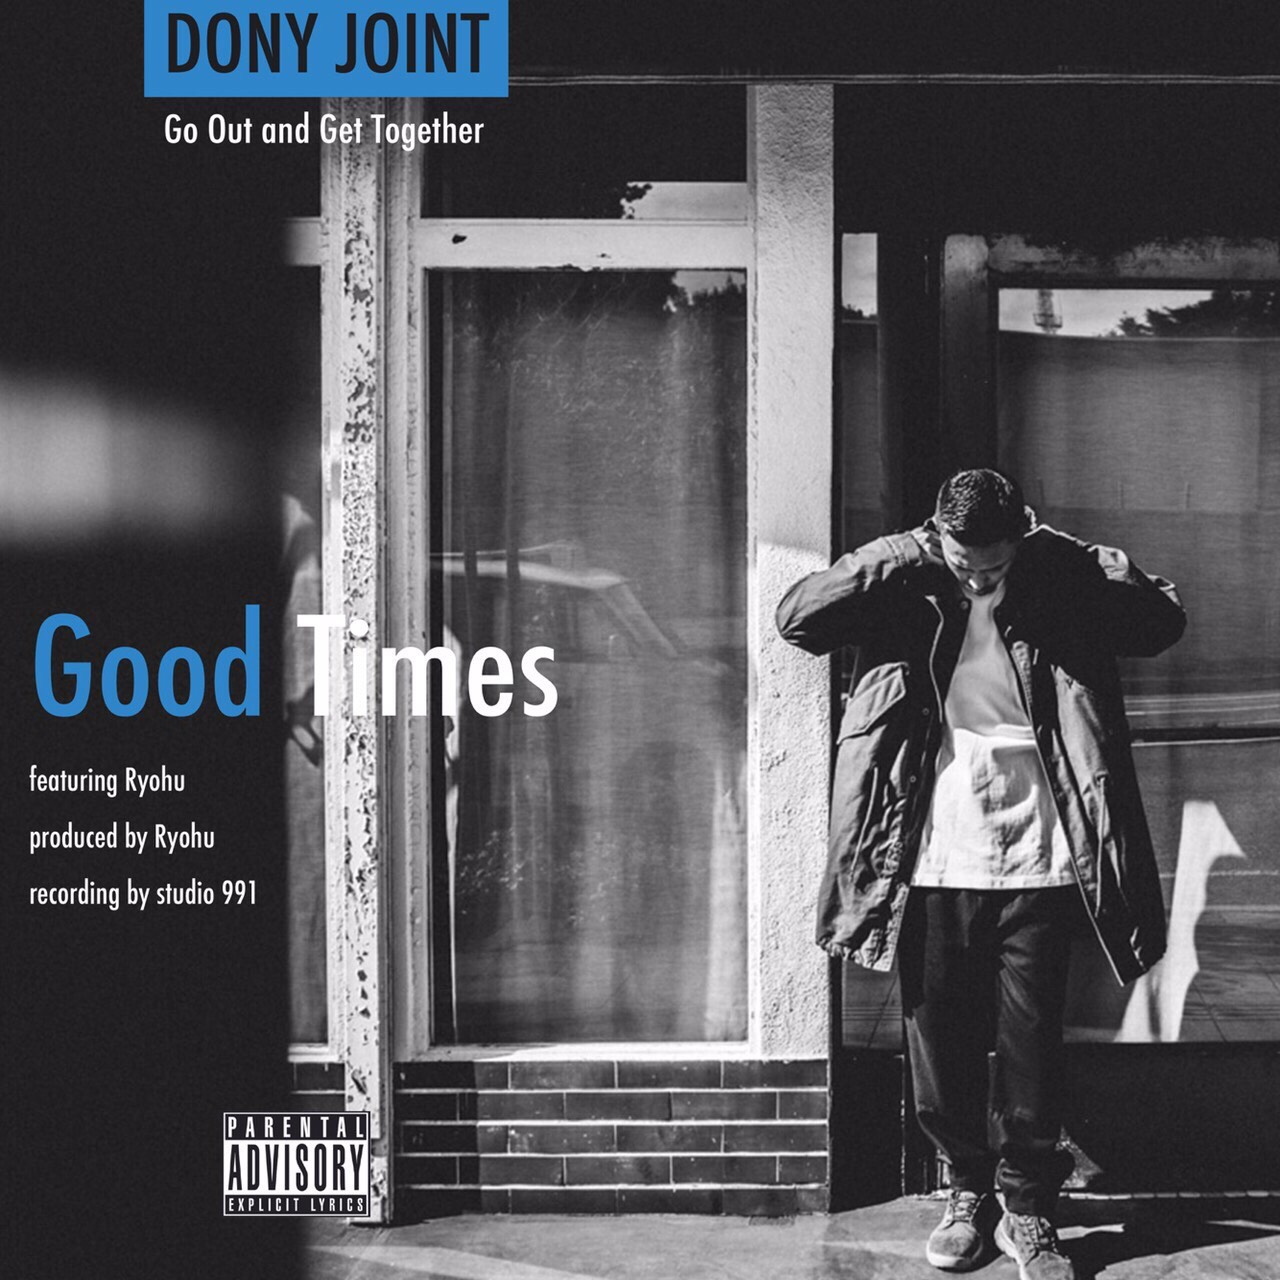 Dony Joint